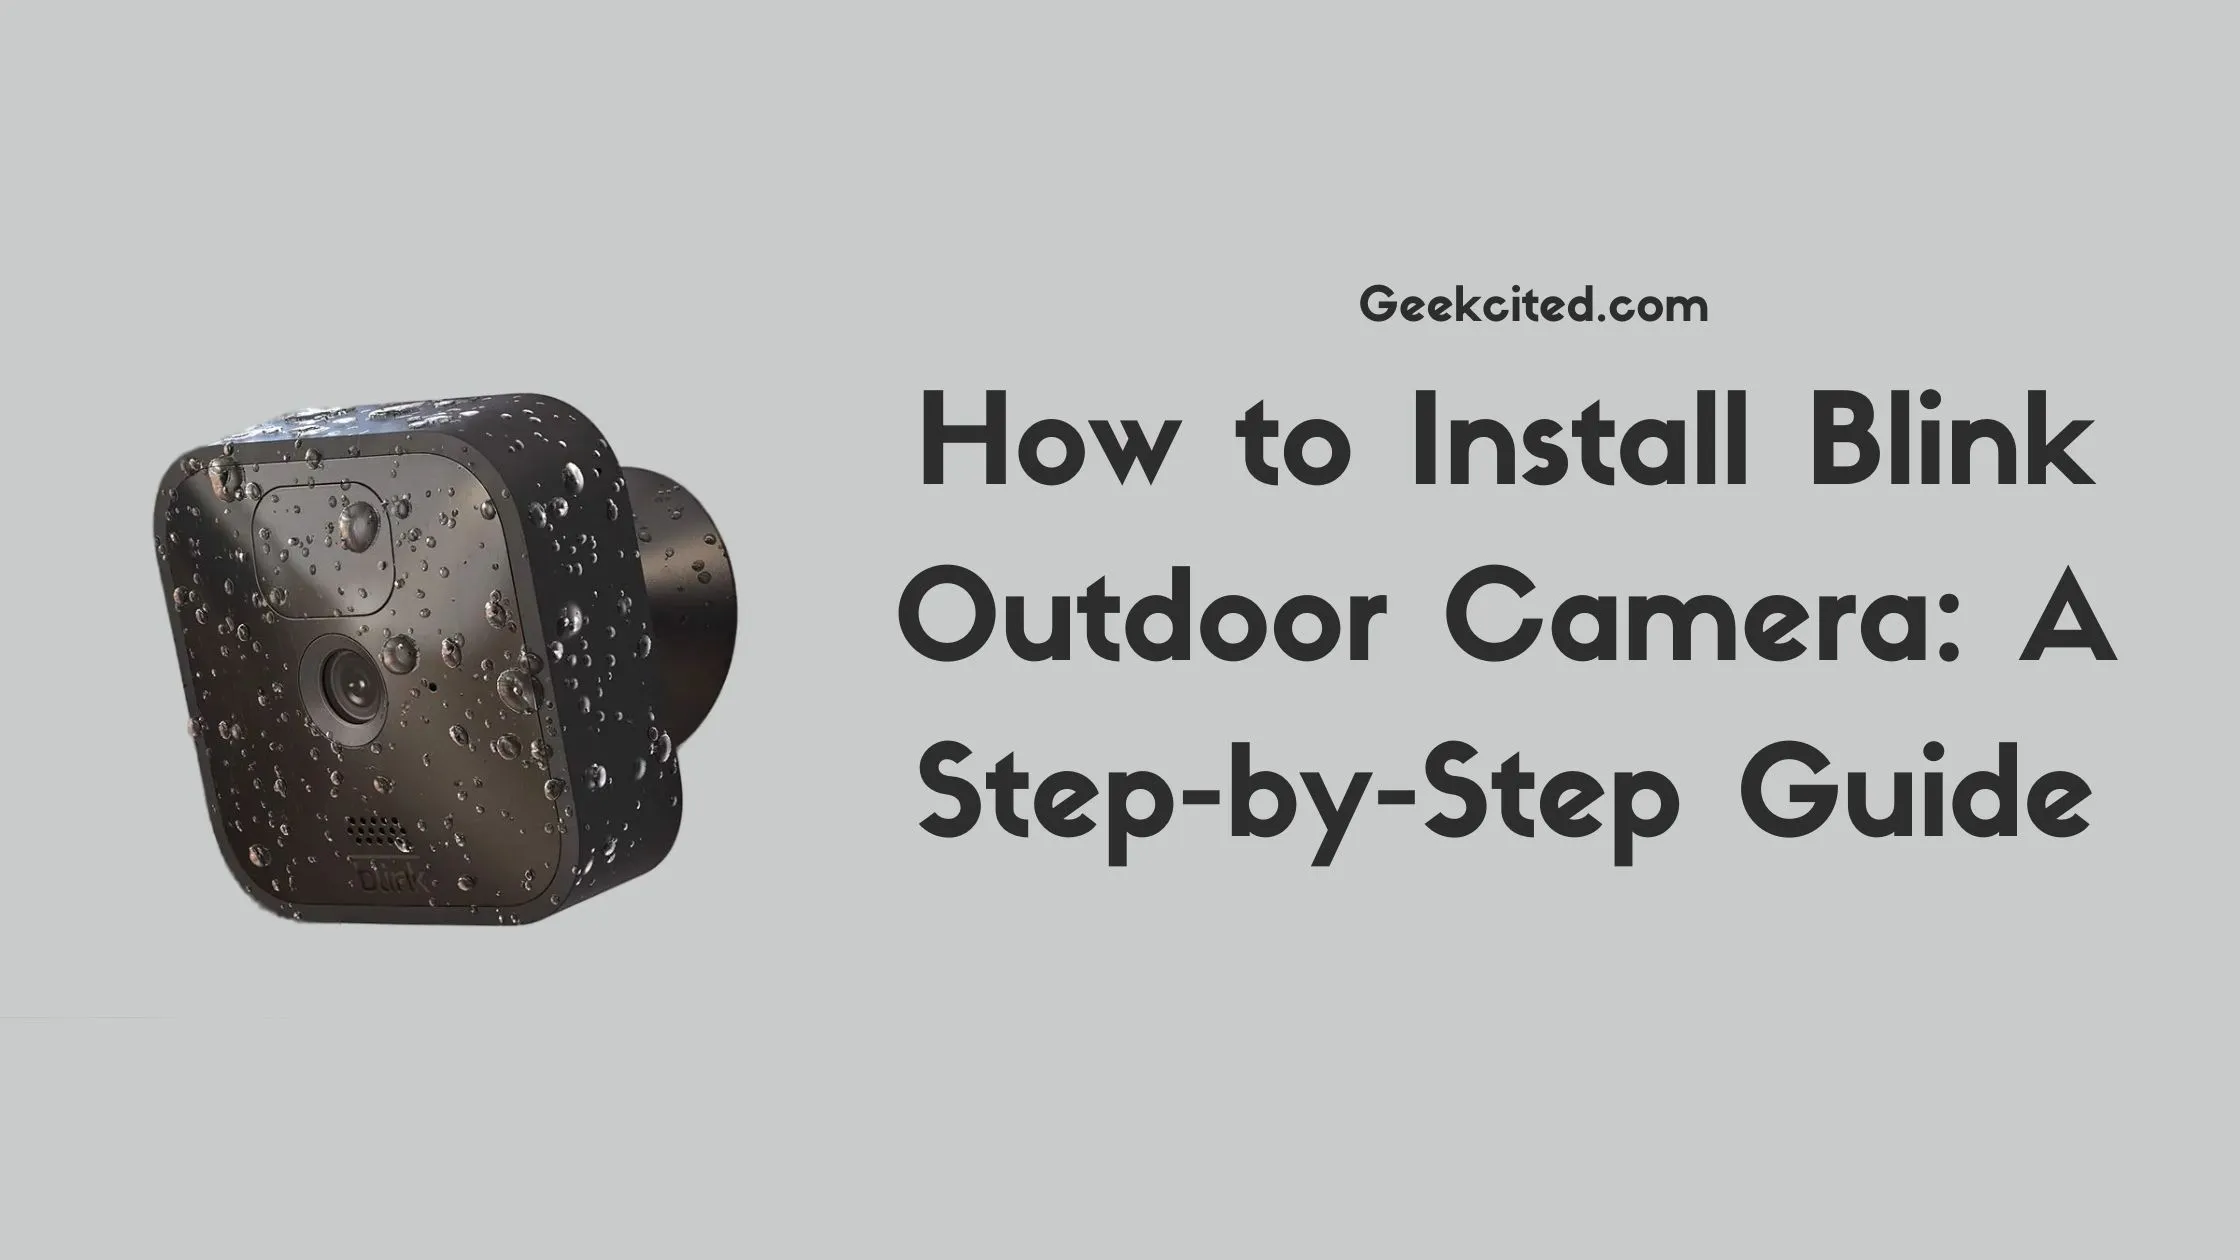 How to Install Blink Outdoor Camera